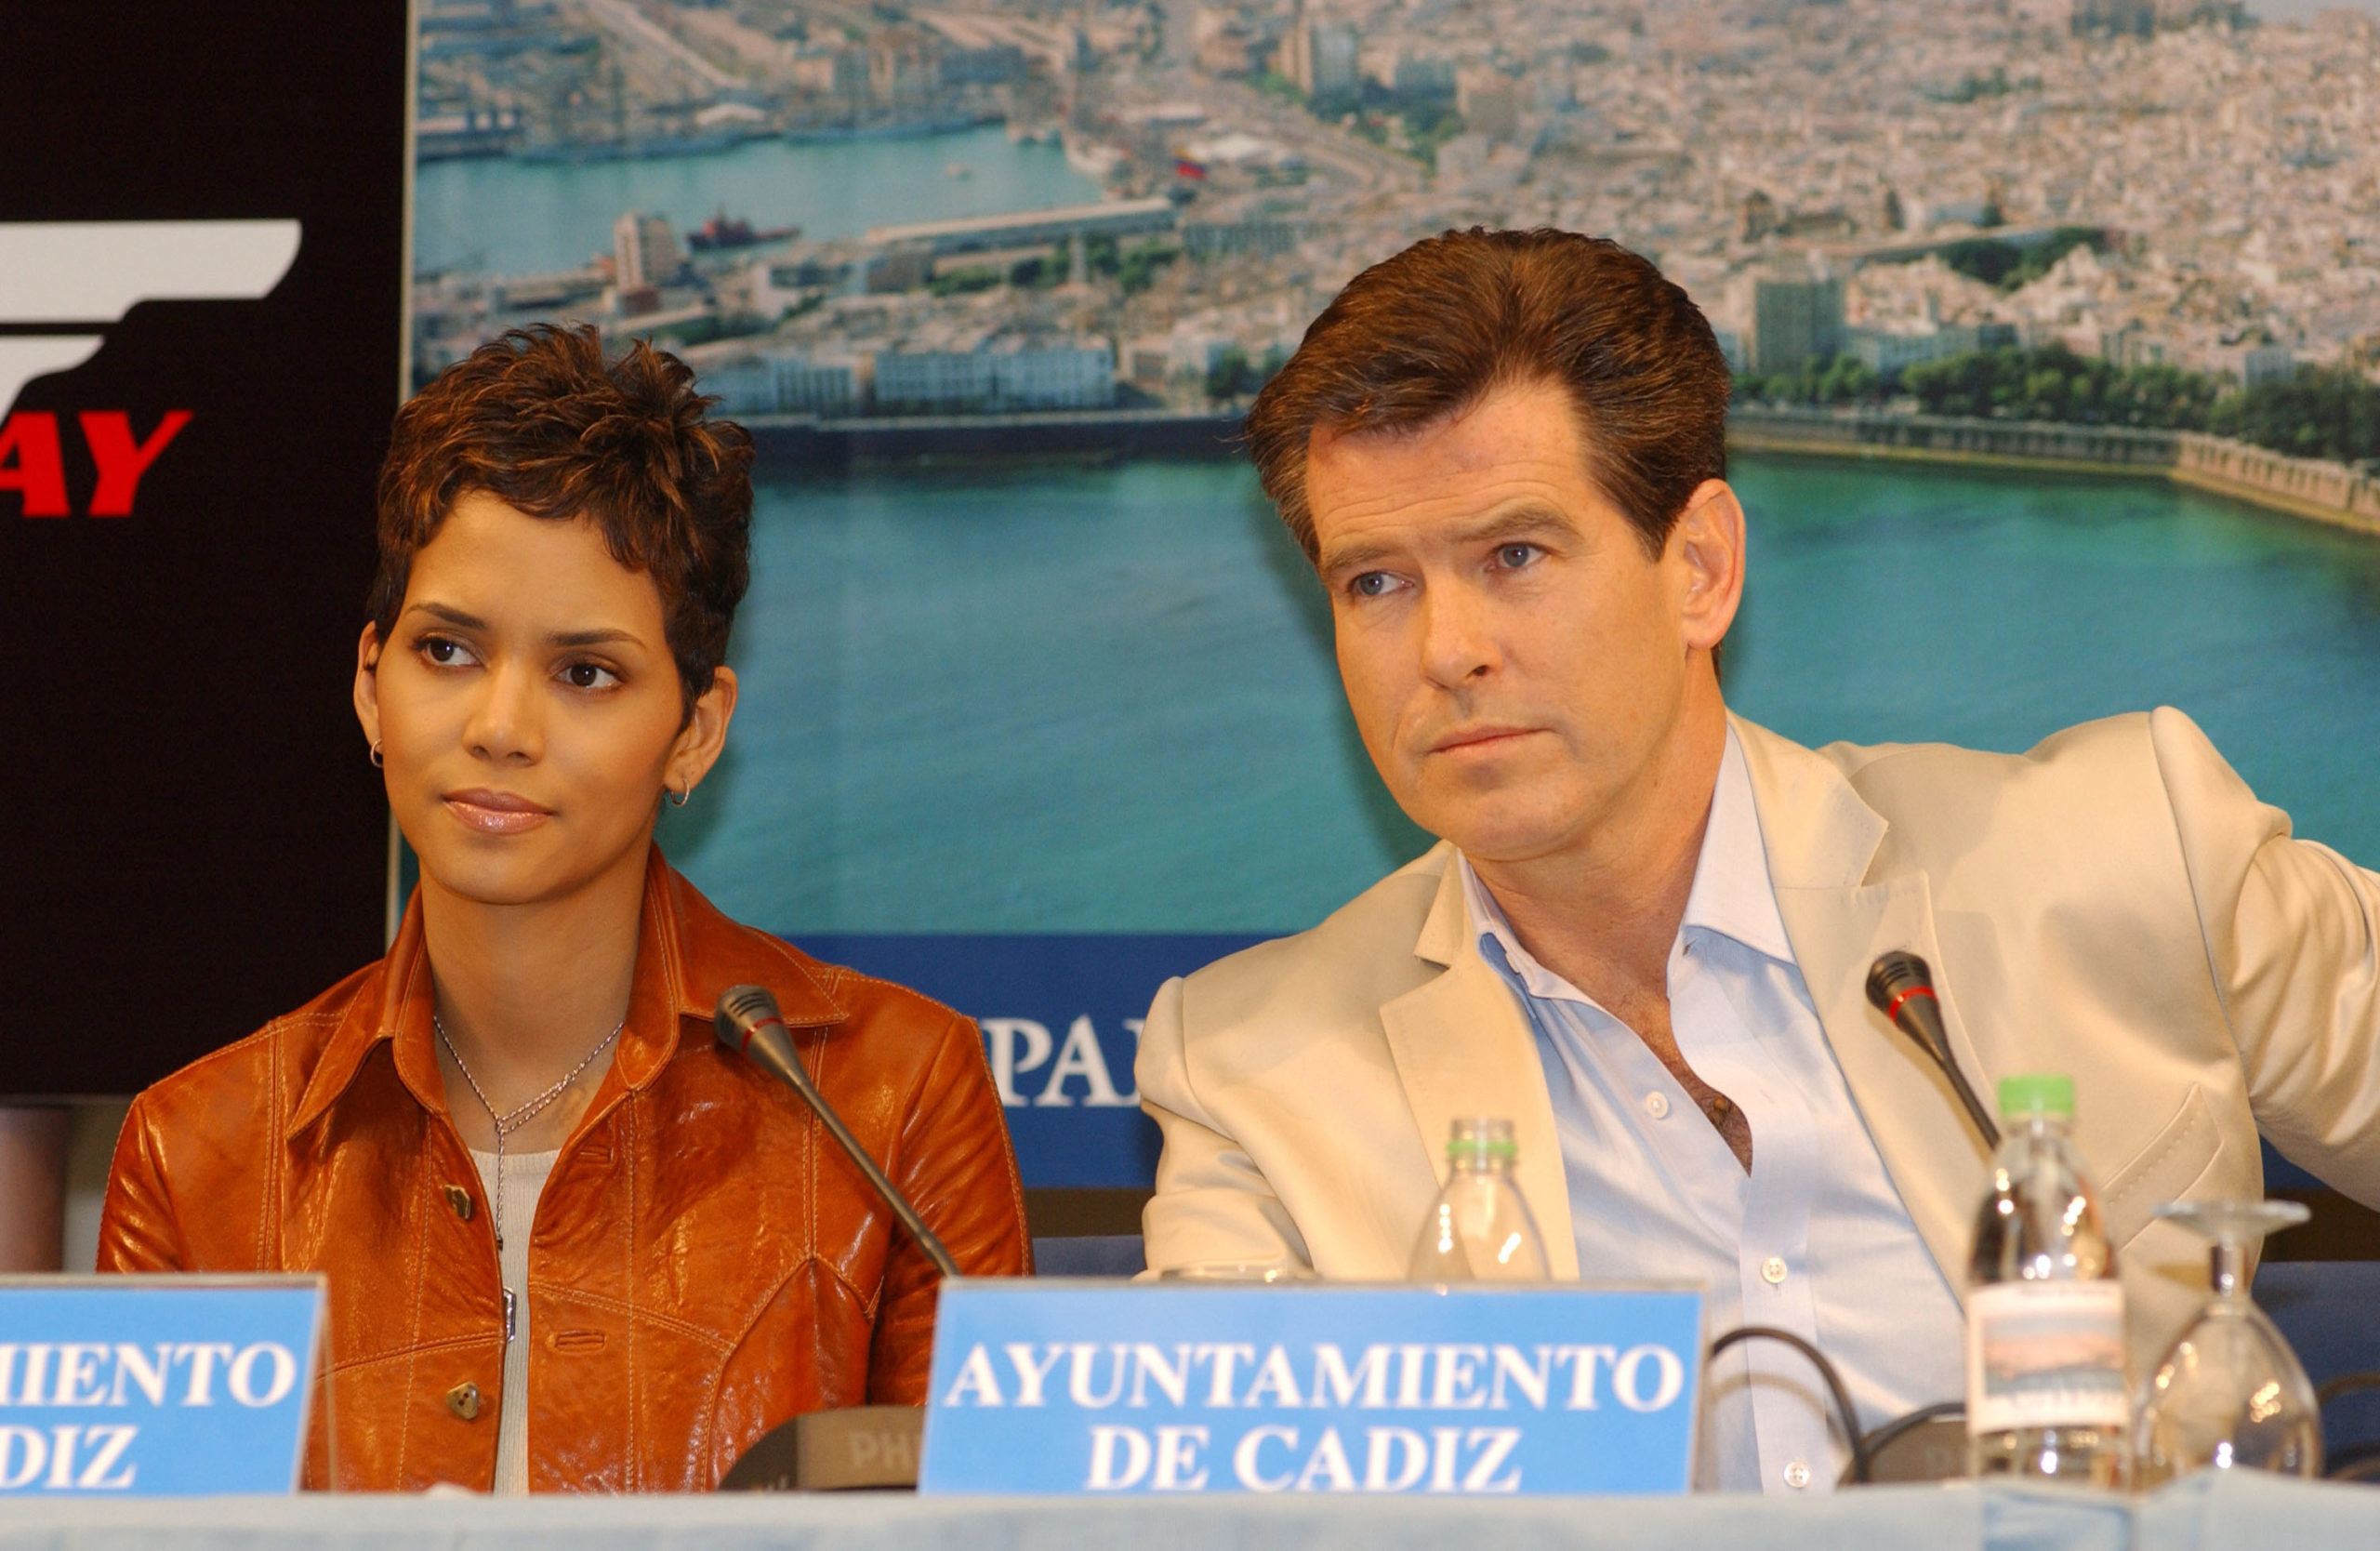 403321 11: Actors Halle Berry and Pierce Brosnan attend a press conference for the next James Bond film "Die Another Day" April 3, 2002 in Cadiz, Spain. The movie, agent 007's 20th outing, will be shot in Cadiz. (Photo by Carlos Alvarez/Getty Images)